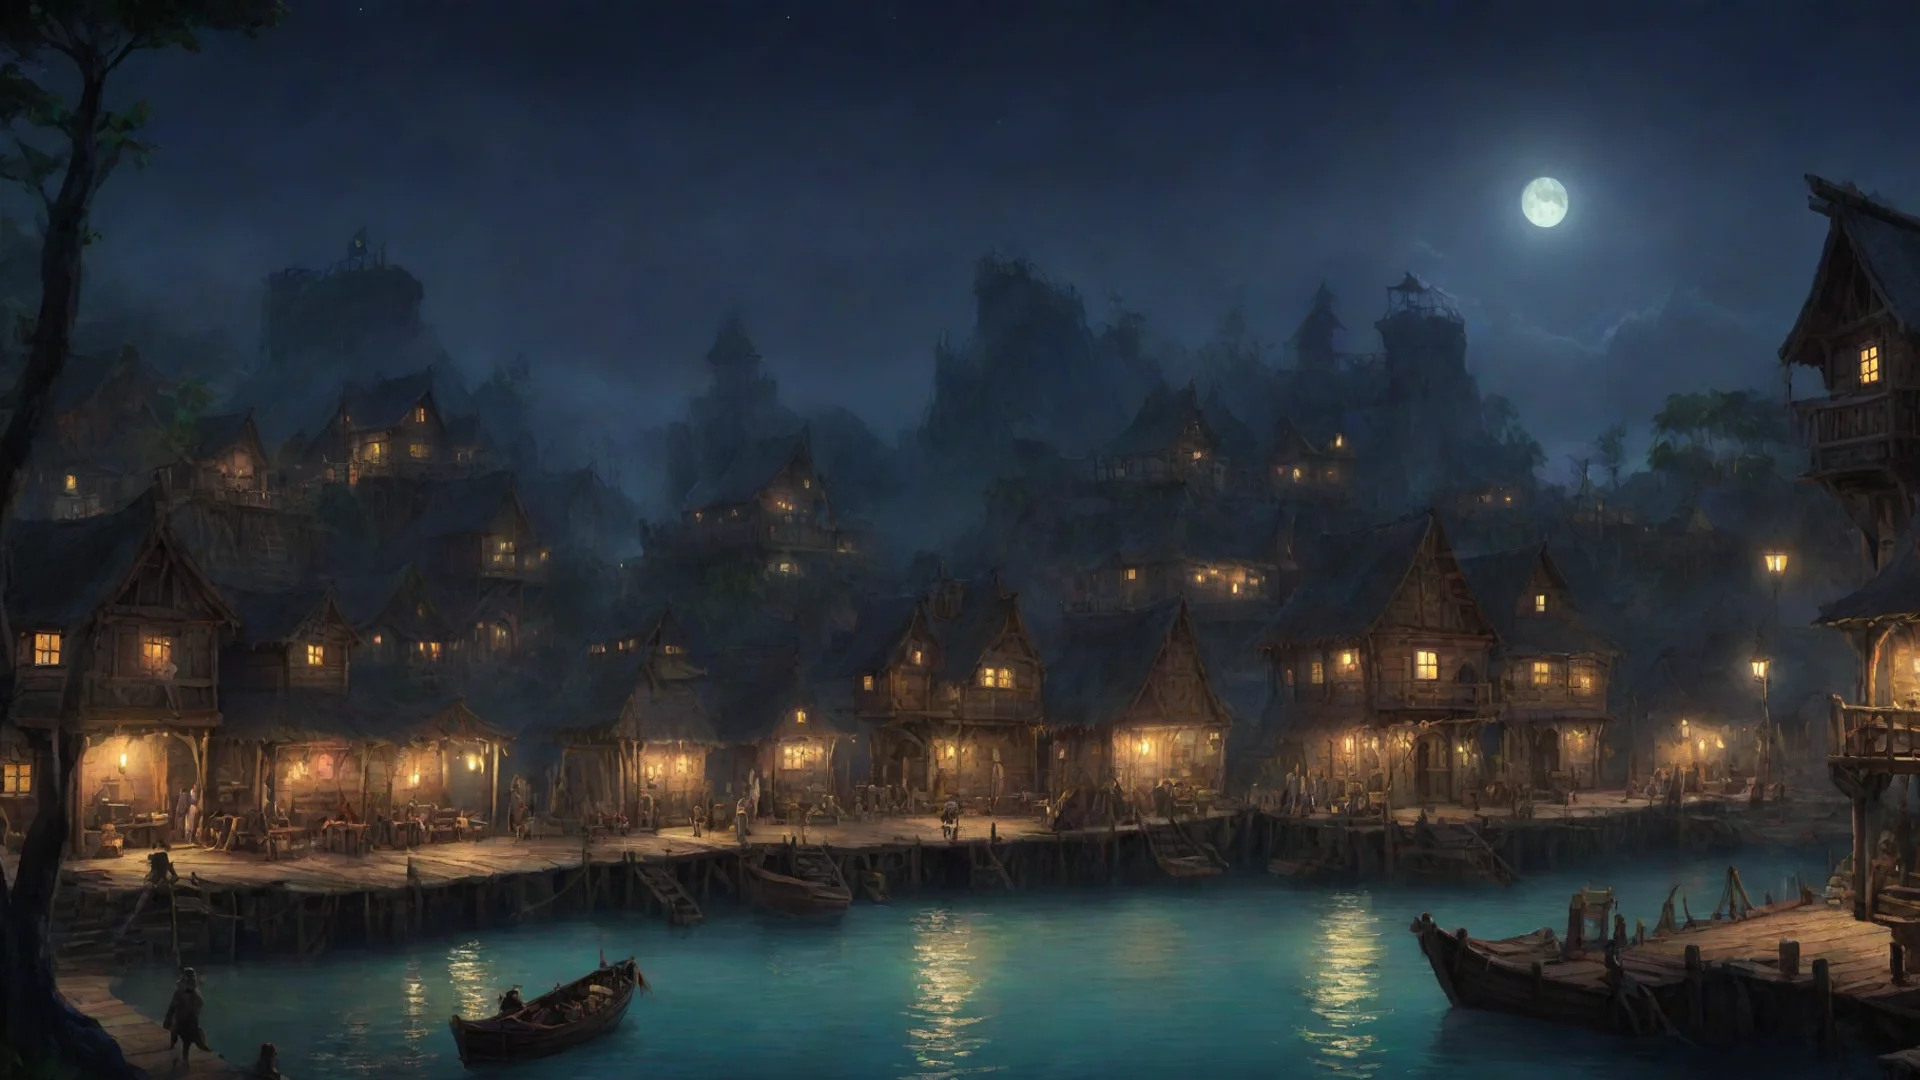 pirate village by night concept art wide